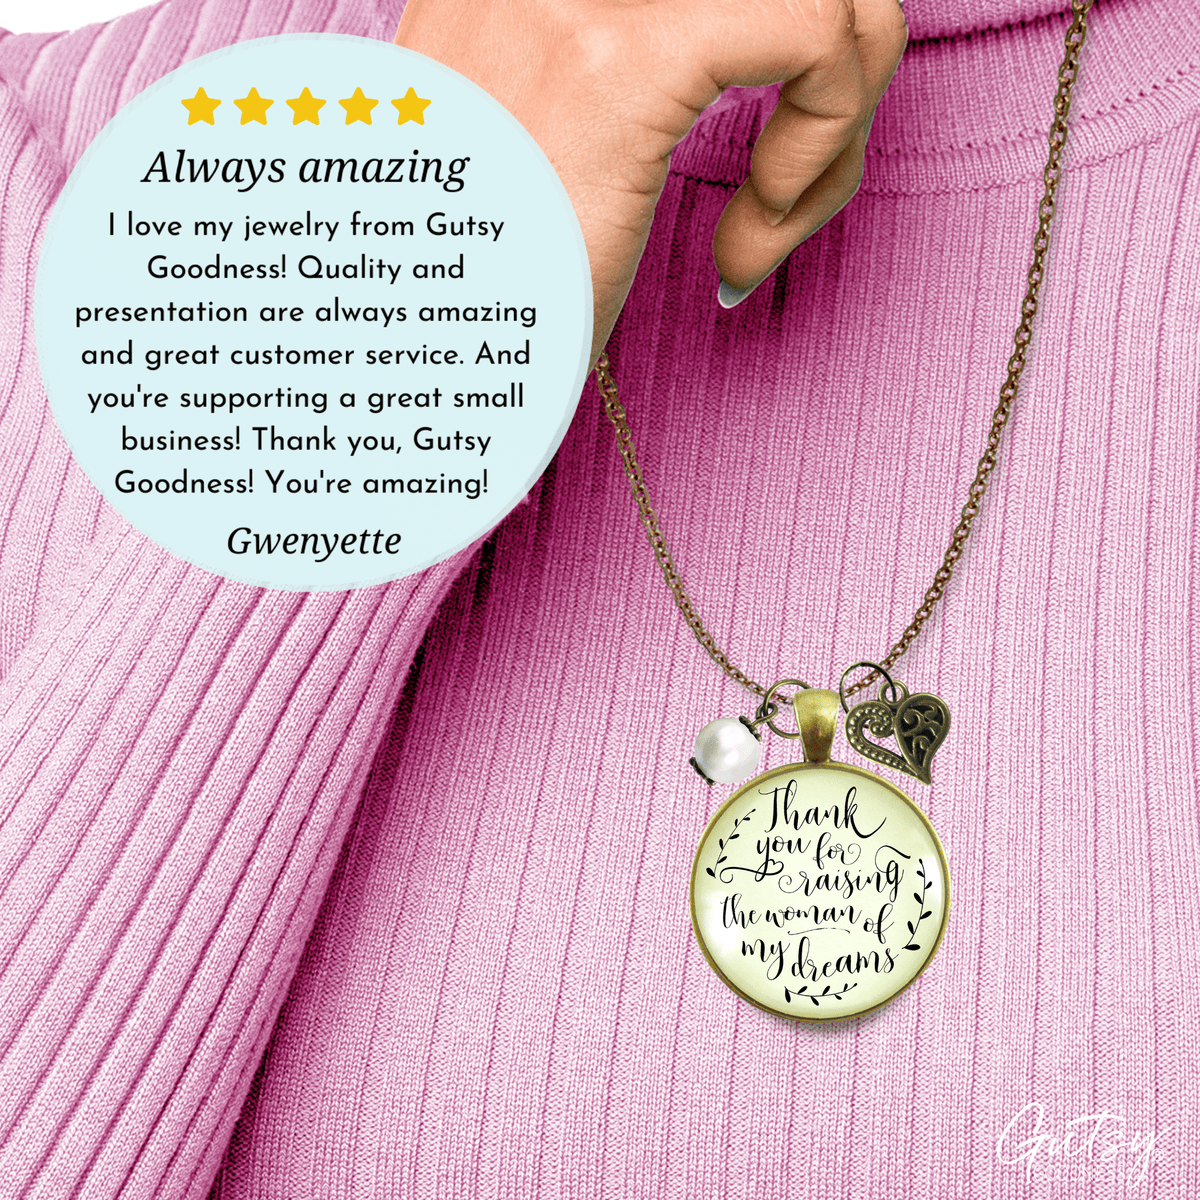 Gutsy Goodness His Mother In Law Necklace Thank You Raising Woman Of Dreams Mom Wedding Jewelry - Gutsy Goodness;His Mother In Law Necklace Thank You Raising Woman Of Dreams Mom Wedding Jewelry - Gutsy Goodness Handmade Jewelry Gifts